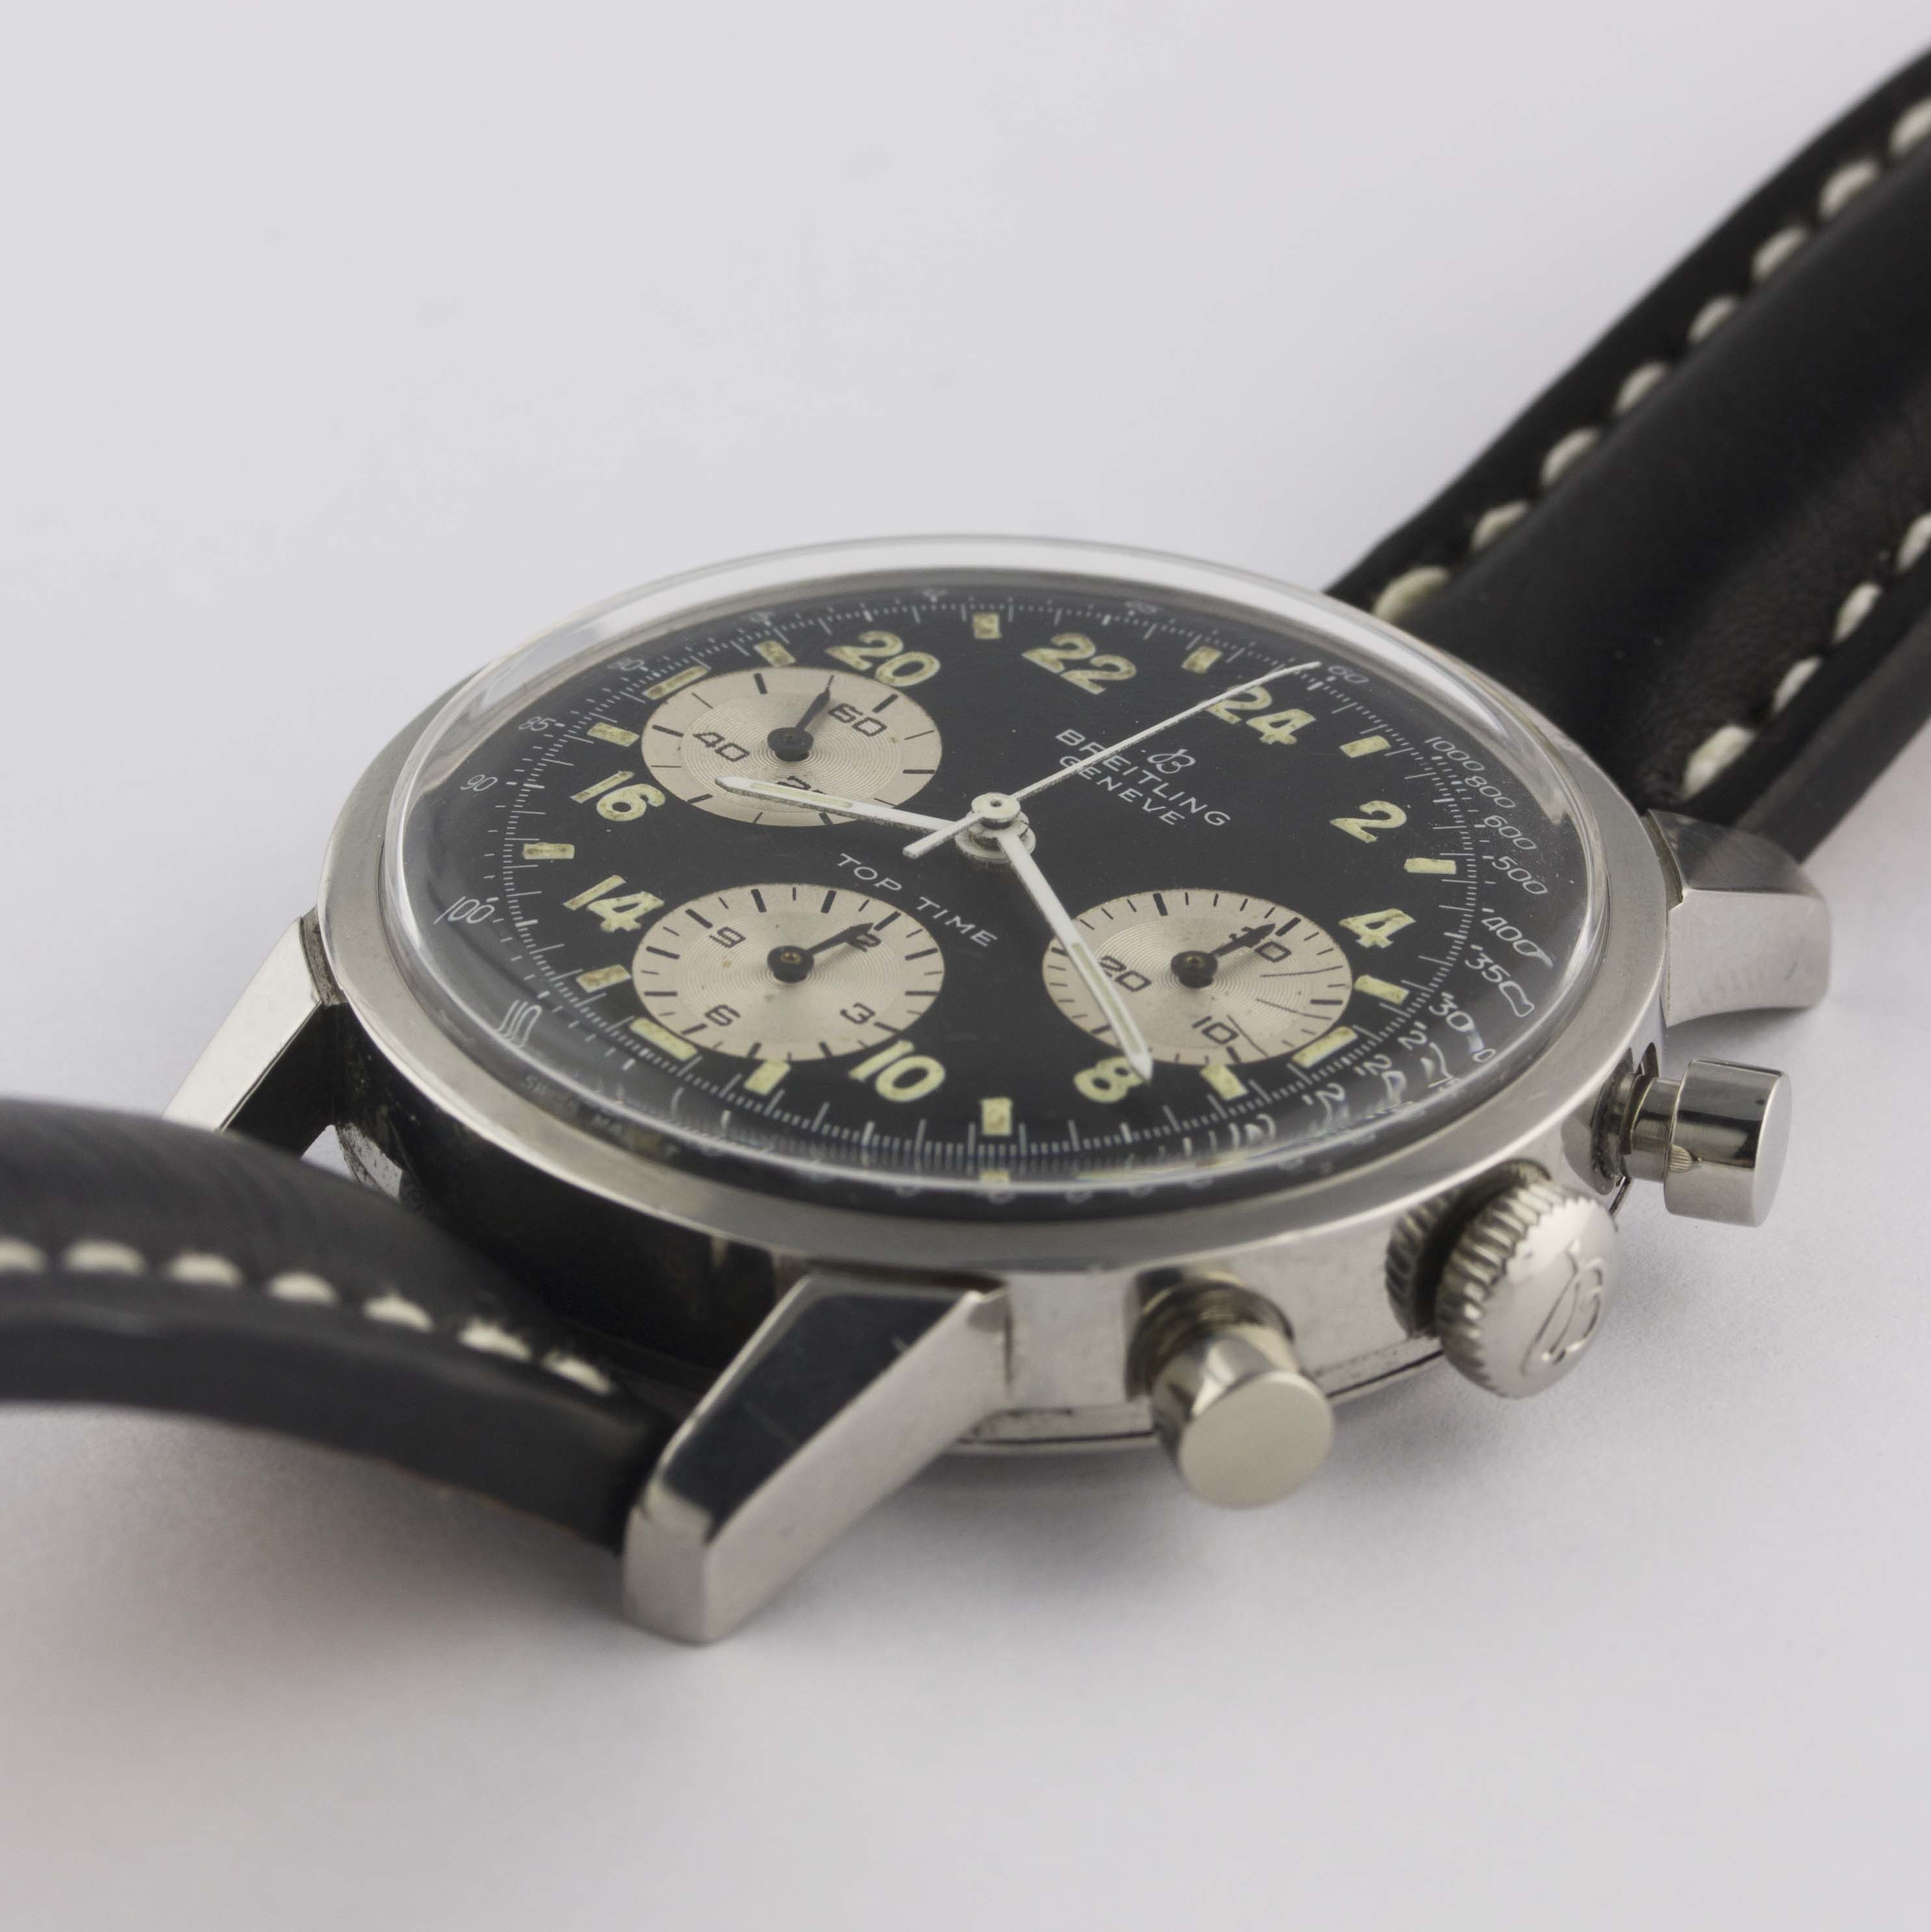 A RARE GENTLEMAN'S STAINLESS STEEL BREITLING TOP TIME 24 HOUR CHRONOGRAPH WRIST WATCH CIRCA 1968, - Image 4 of 12